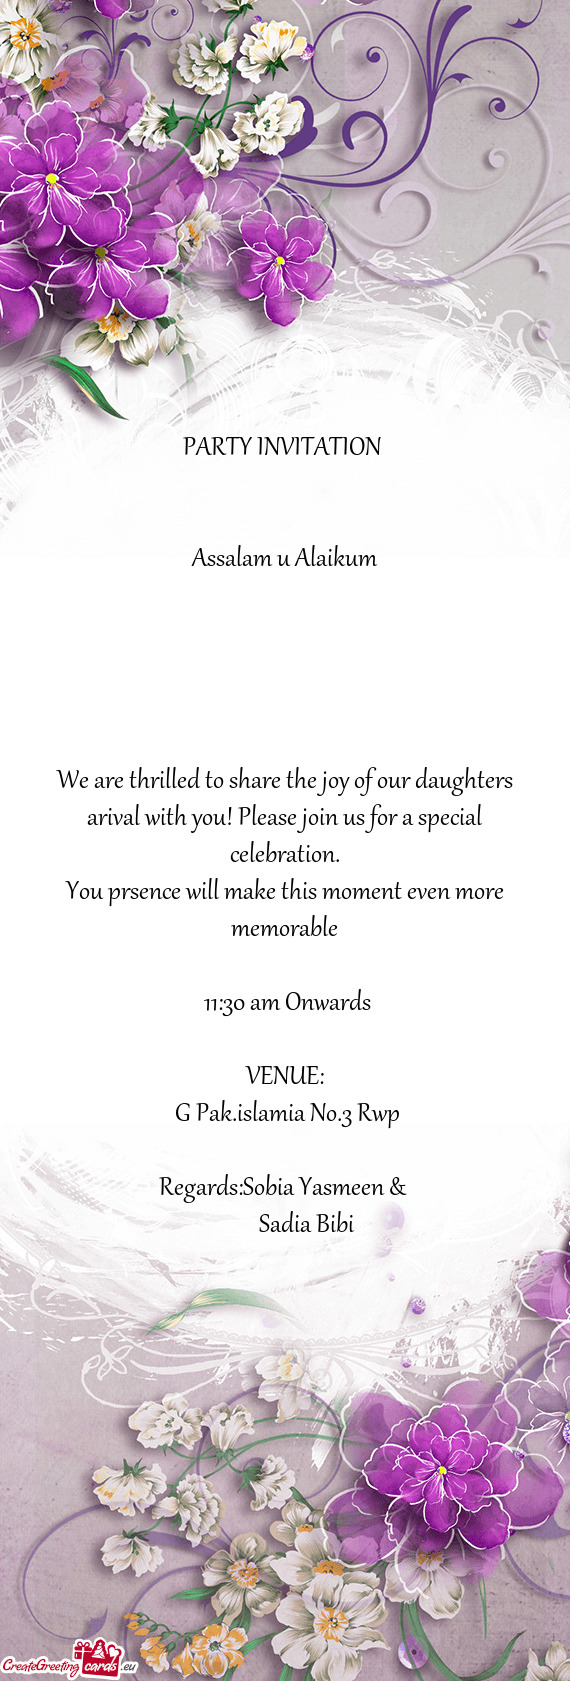 We are thrilled to share the joy of our daughters arival with you! Please join us for a special cele